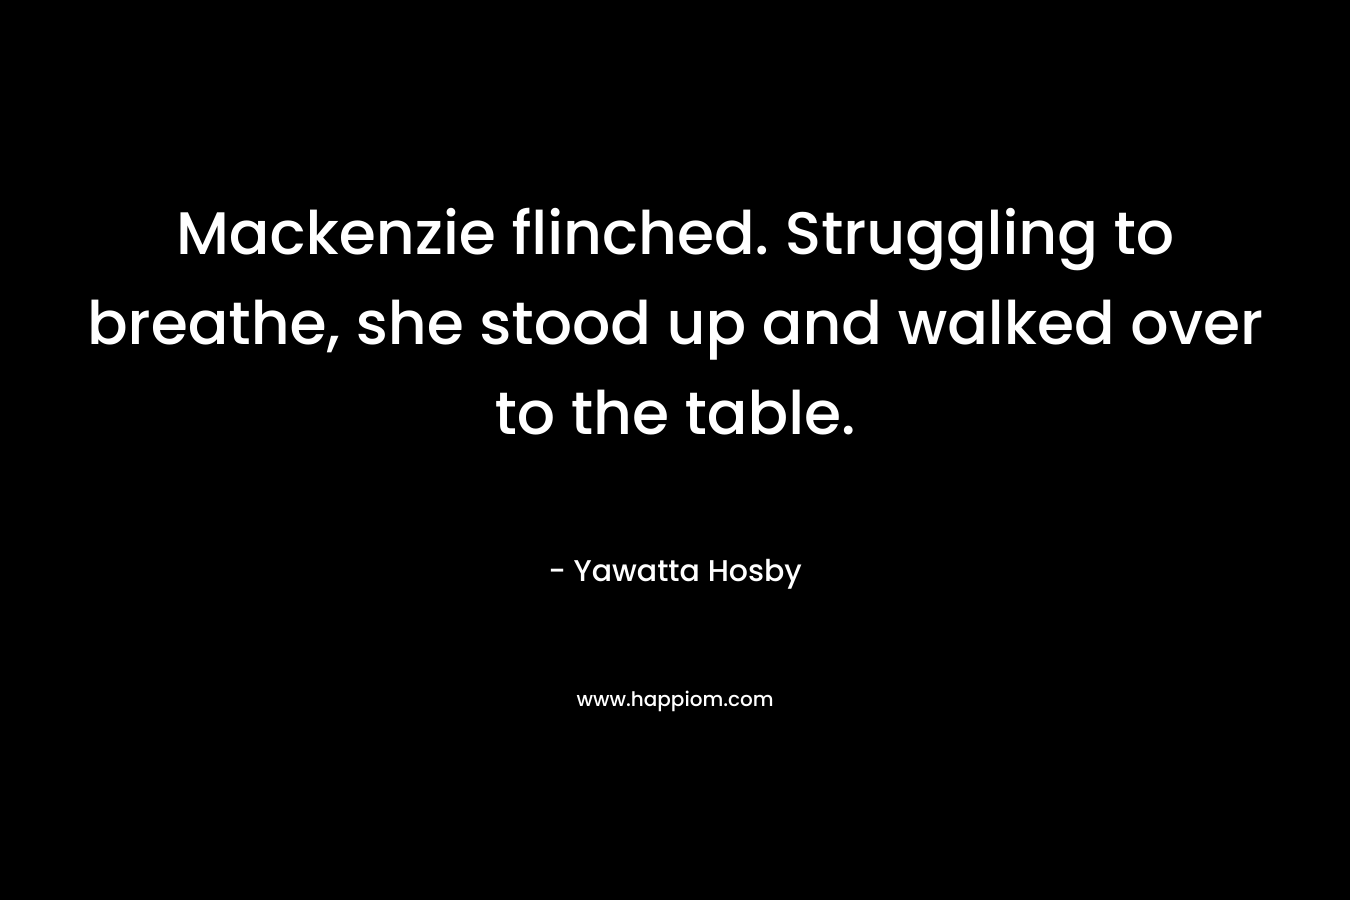 Mackenzie flinched. Struggling to breathe, she stood up and walked over to the table. – Yawatta Hosby